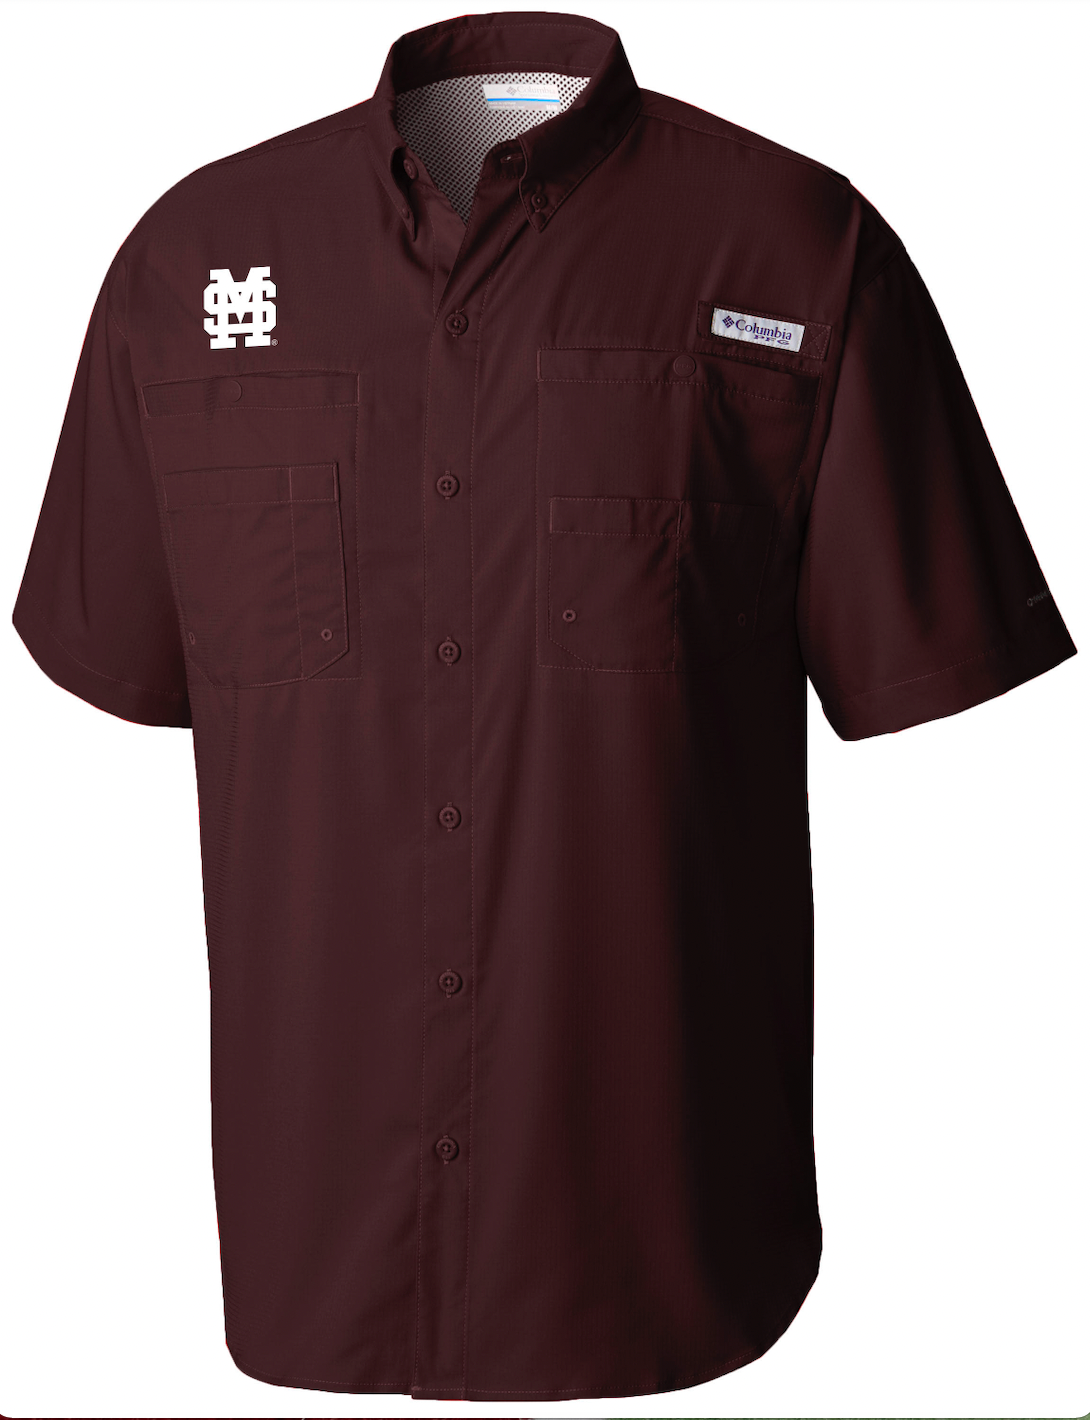 Columbia Men's Maroon Tamiami M over S Button Down Shirt